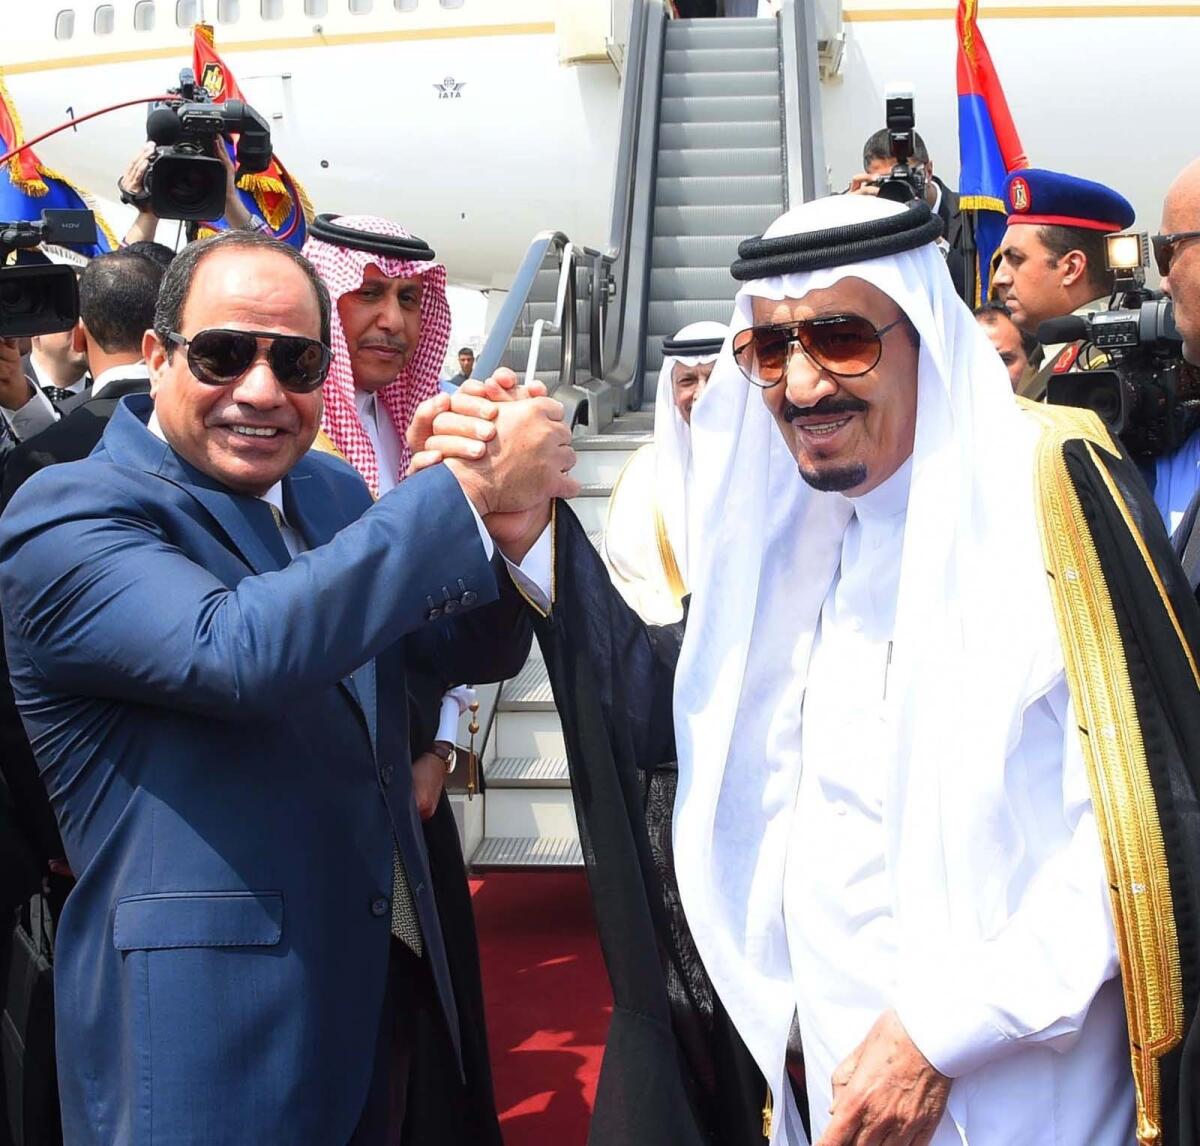 Egyptian President Abdul Fattah Sisi, left, shakes hands with Saudi Arabia's King Salman in Cairo before the monarch ended his visit to Egypt on April 11, 2016.